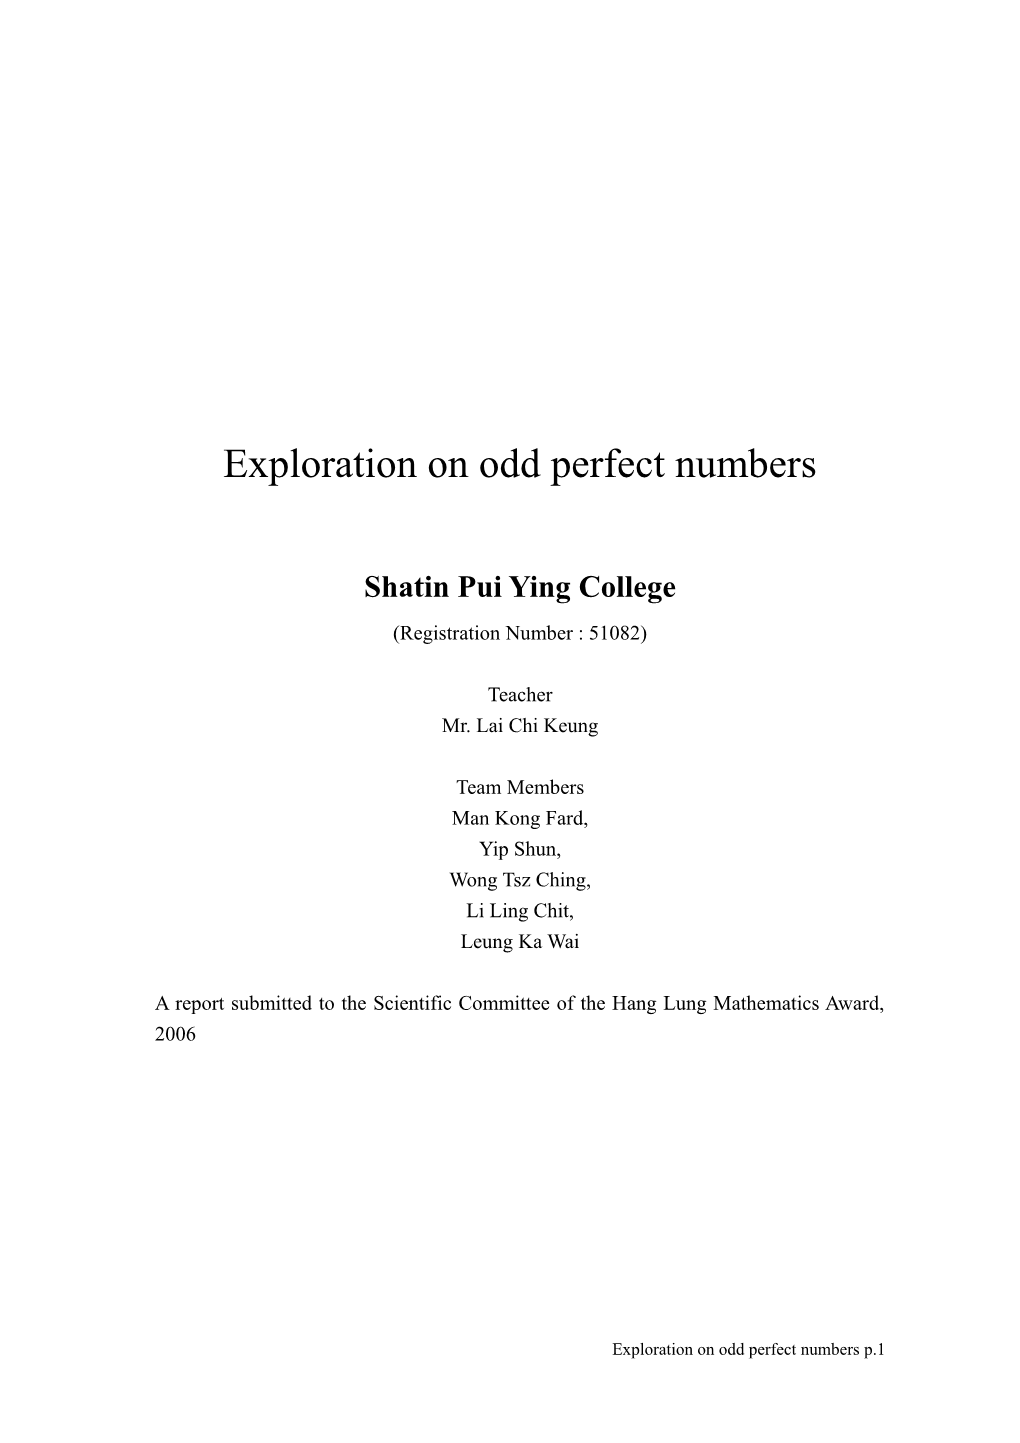 Exploration on Odd Perfect Numbers